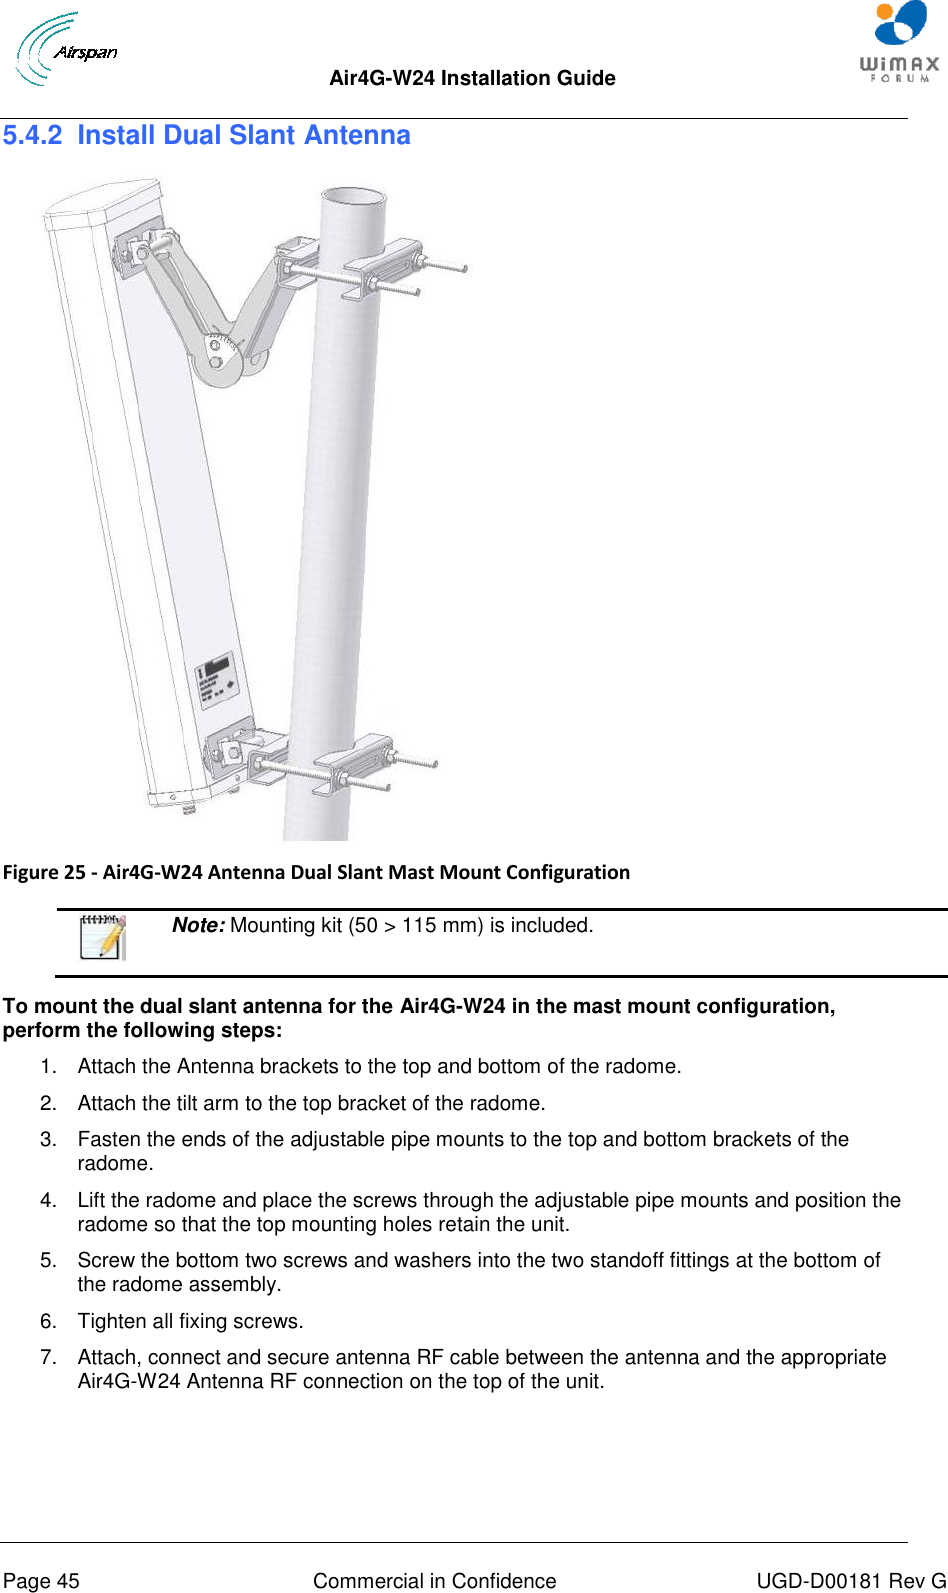  Air4G-W24 Installation Guide     Page 45  Commercial in Confidence  UGD-D00181 Rev G 5.4.2  Install Dual Slant Antenna   Figure 25 - Air4G-W24 Antenna Dual Slant Mast Mount Configuration    Note: Mounting kit (50 &gt; 115 mm) is included.  To mount the dual slant antenna for the Air4G-W24 in the mast mount configuration, perform the following steps: 1.  Attach the Antenna brackets to the top and bottom of the radome.  2.  Attach the tilt arm to the top bracket of the radome. 3.  Fasten the ends of the adjustable pipe mounts to the top and bottom brackets of the radome. 4.  Lift the radome and place the screws through the adjustable pipe mounts and position the radome so that the top mounting holes retain the unit. 5.  Screw the bottom two screws and washers into the two standoff fittings at the bottom of the radome assembly. 6.  Tighten all fixing screws. 7.  Attach, connect and secure antenna RF cable between the antenna and the appropriate Air4G-W24 Antenna RF connection on the top of the unit. 